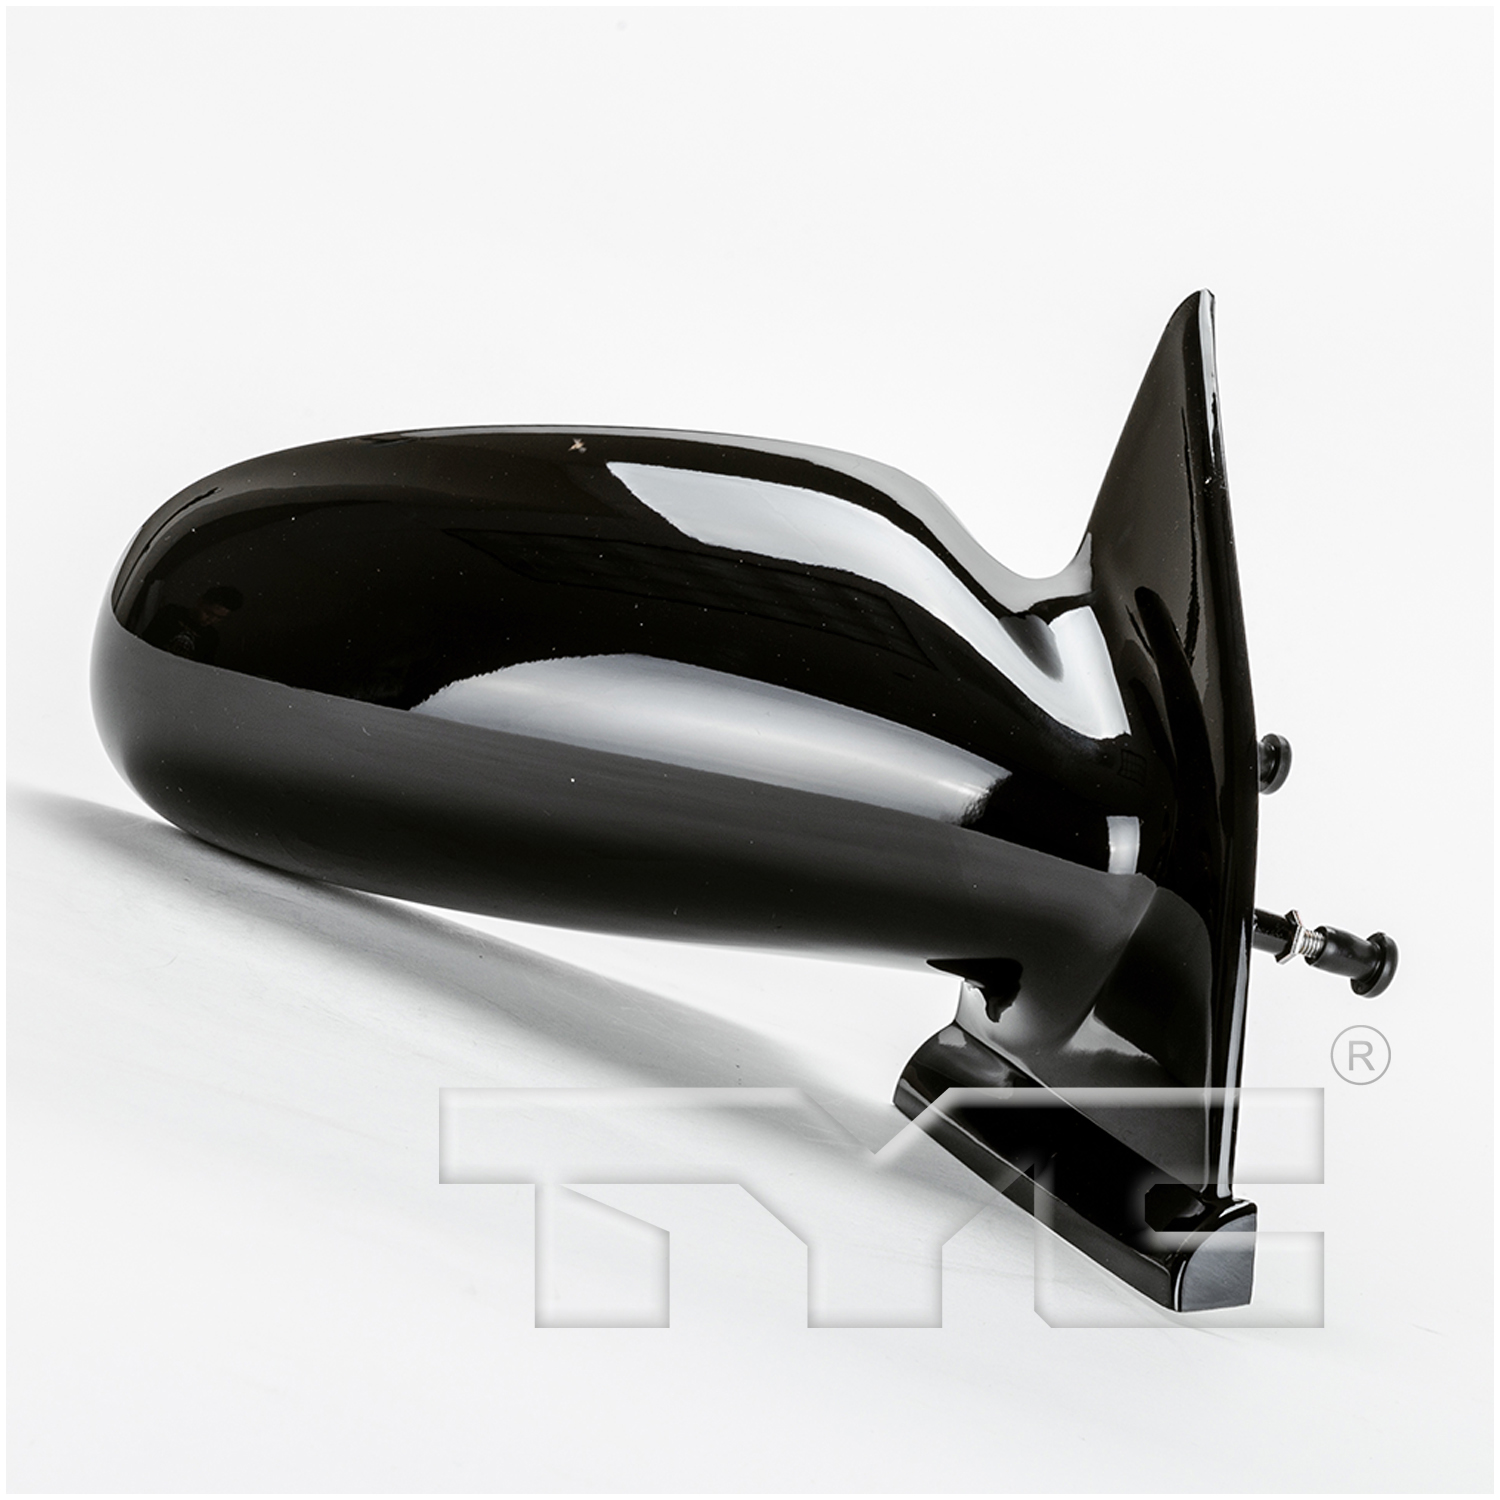 Aftermarket MIRRORS for SATURN - SL, SL,96-02,RT Mirror outside rear view